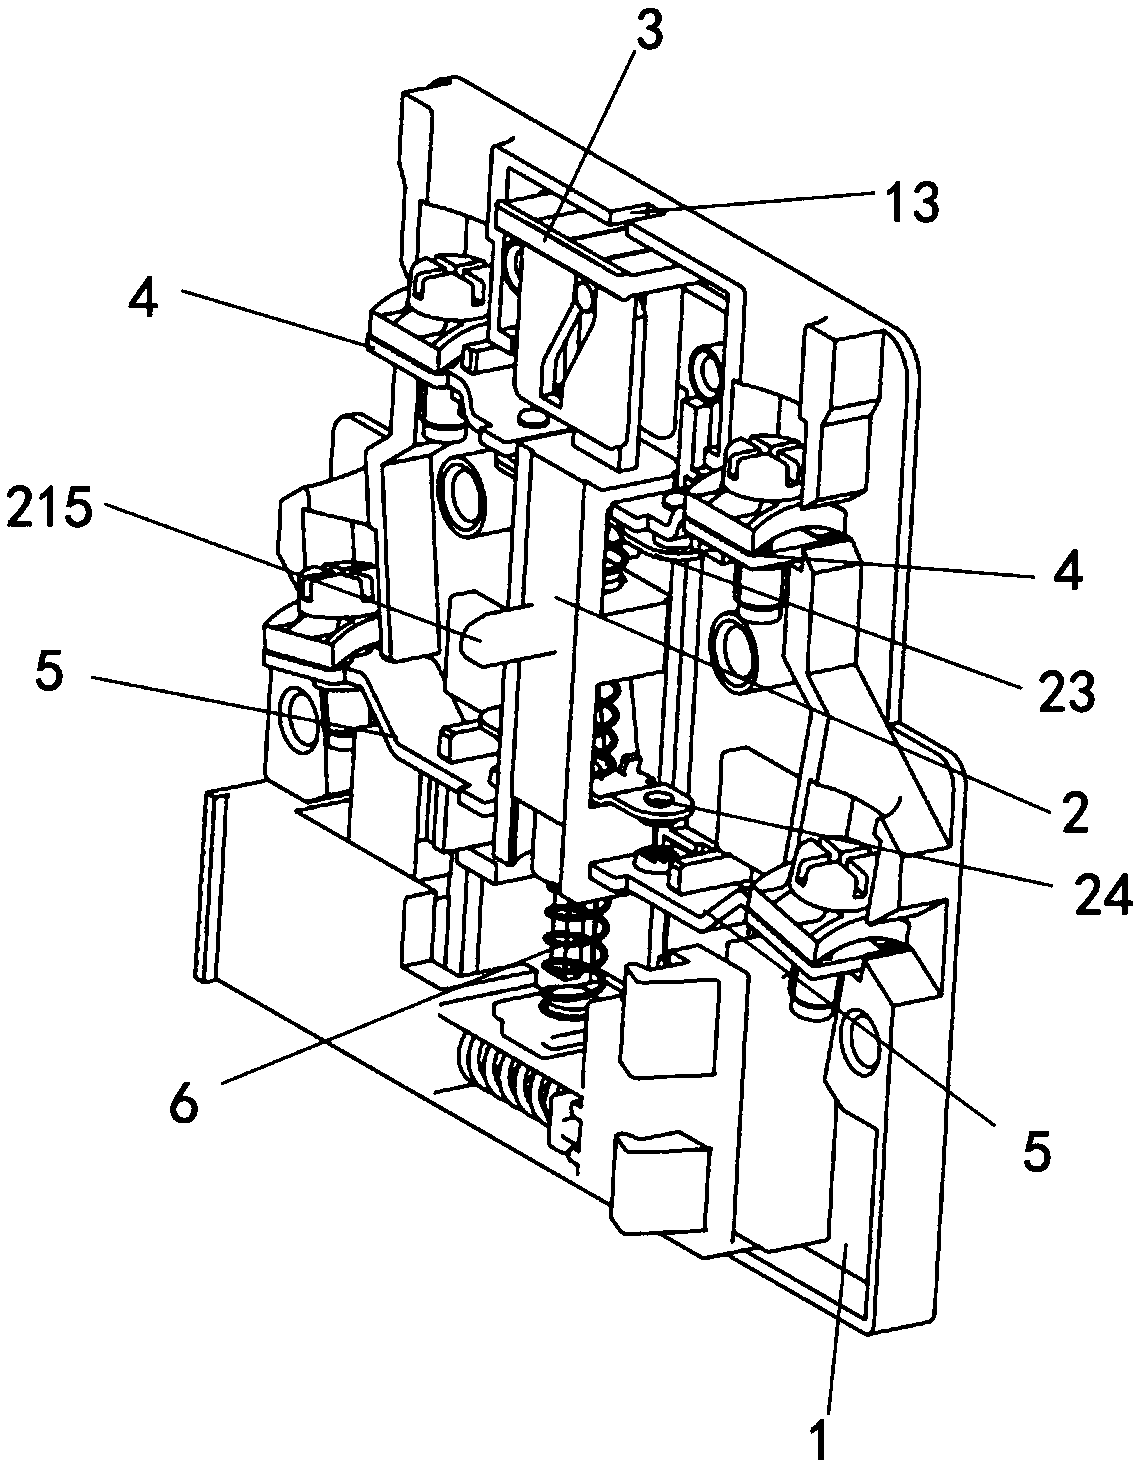 Auxiliary contact with indication function, and contactor